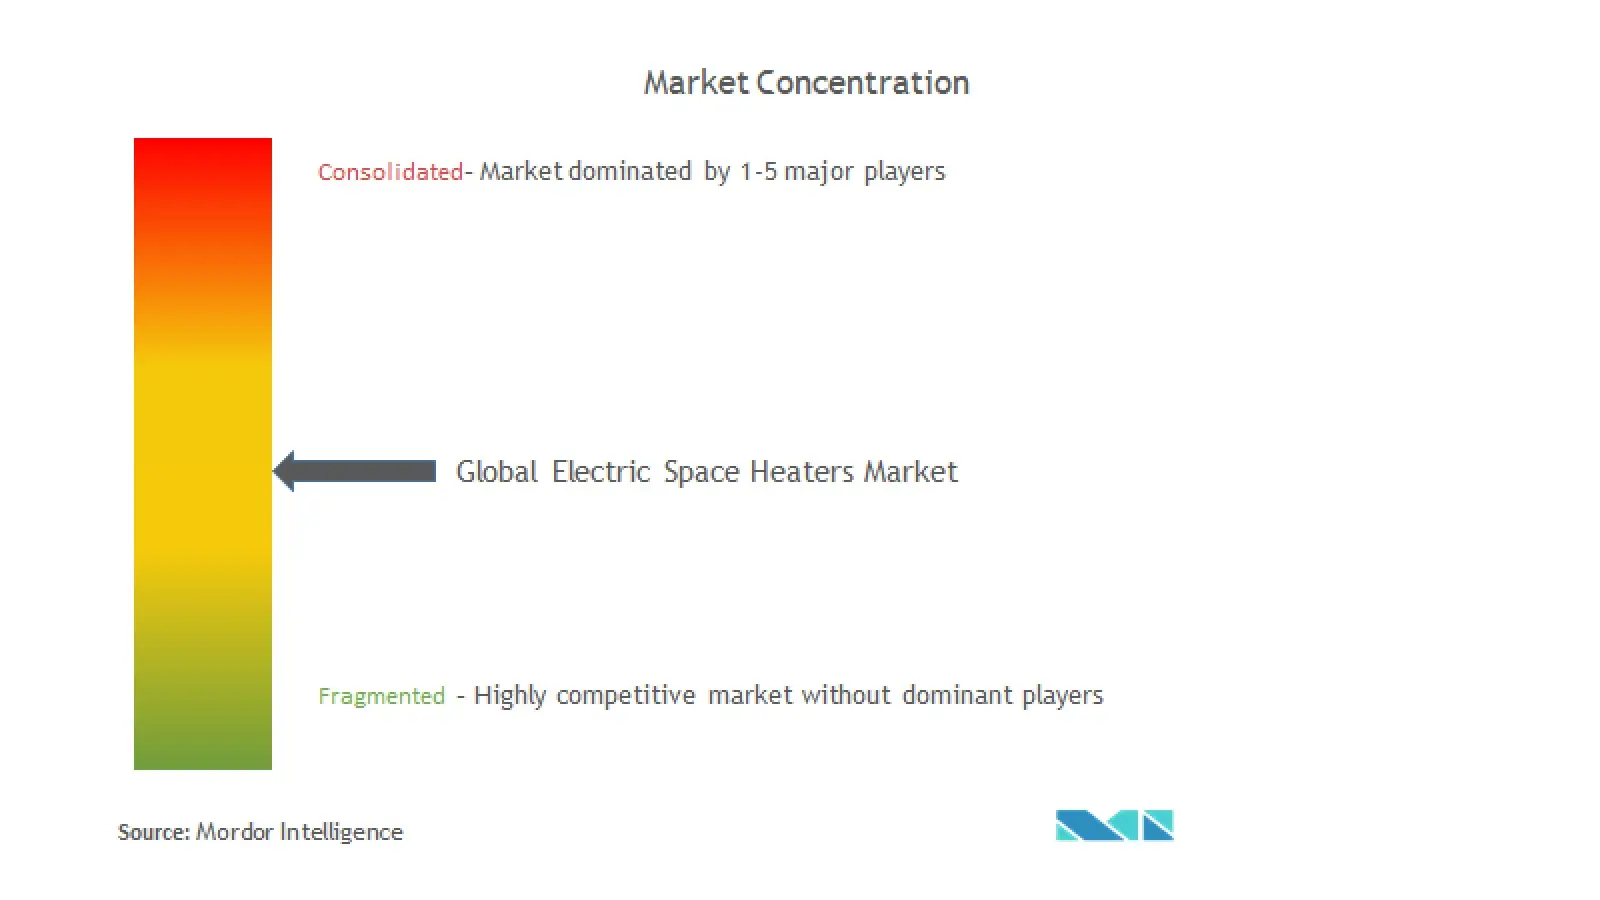 Global Electric Space Heaters Market Concentration